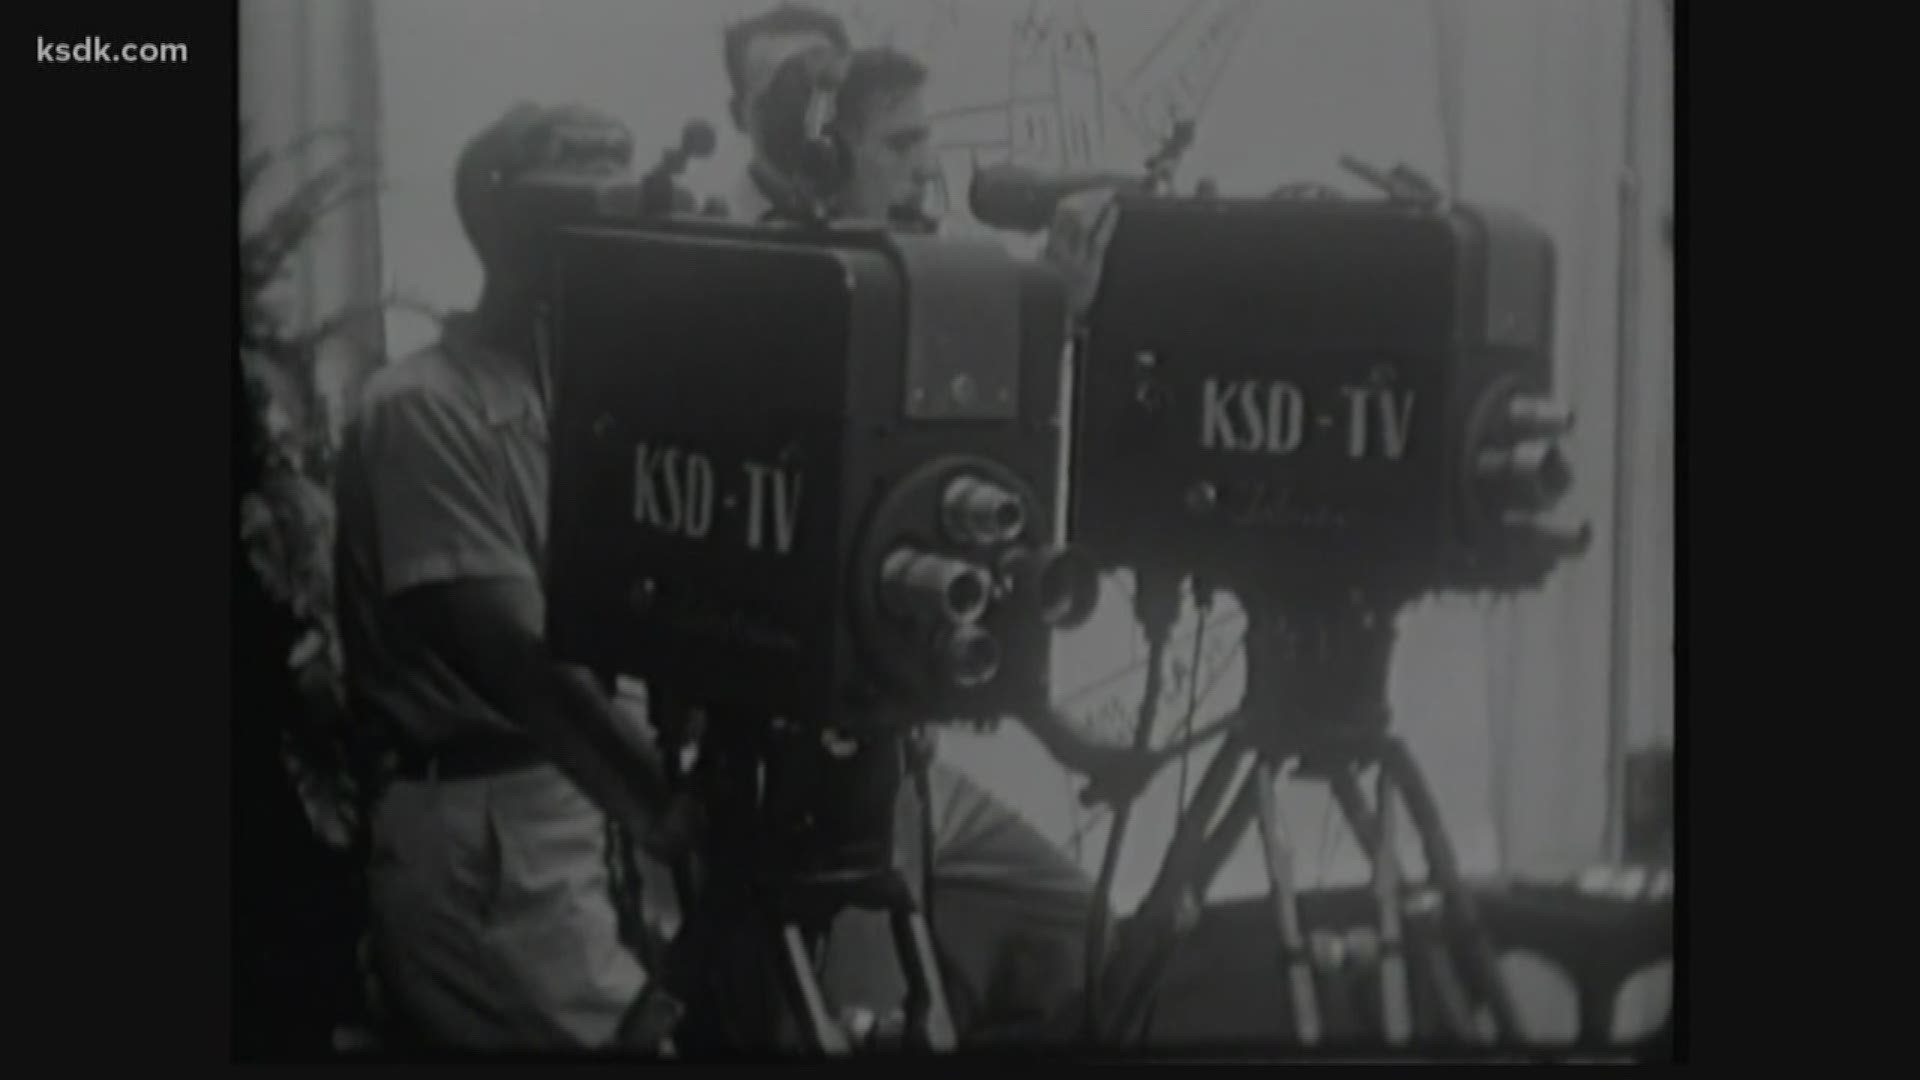 The station was known as KSD the day it signed on the air in St. Louis, and there were only four television sets in the entire viewing area